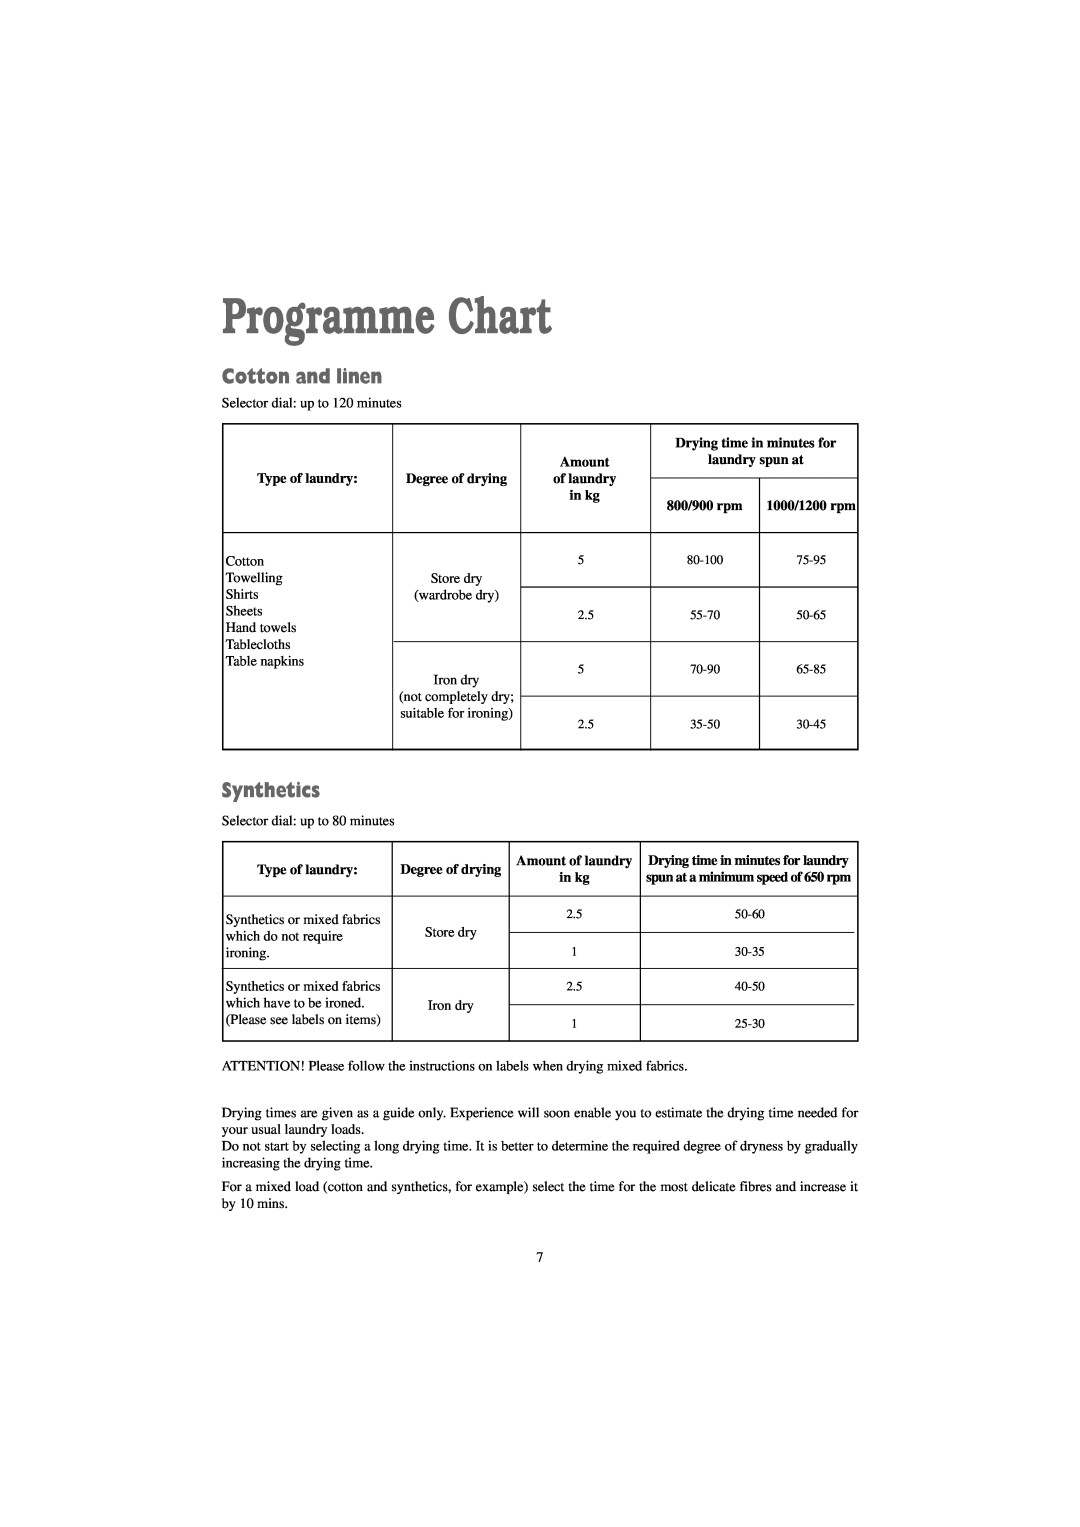 Zanussi TD 4100 W Programme Chart, Cotton and linen, Synthetics, Drying time in minutes for, laundry spun at, of laundry 